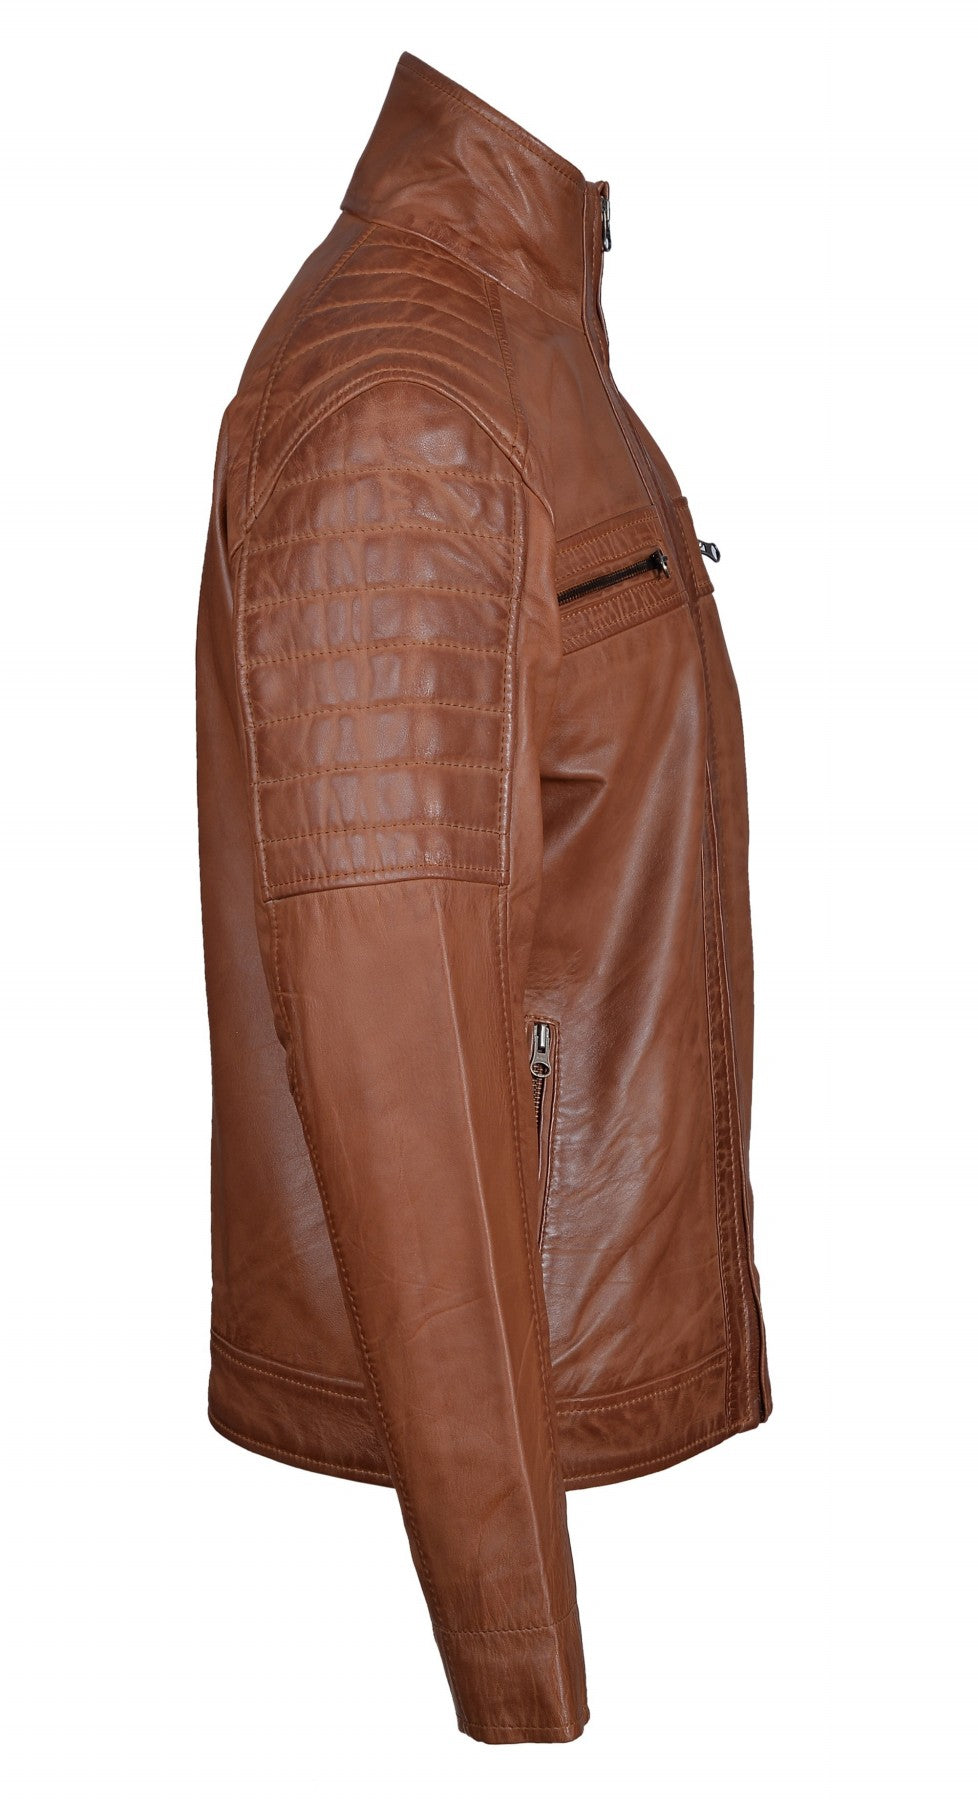 Arm Patches Comfortable Bogdans brown leather jacket